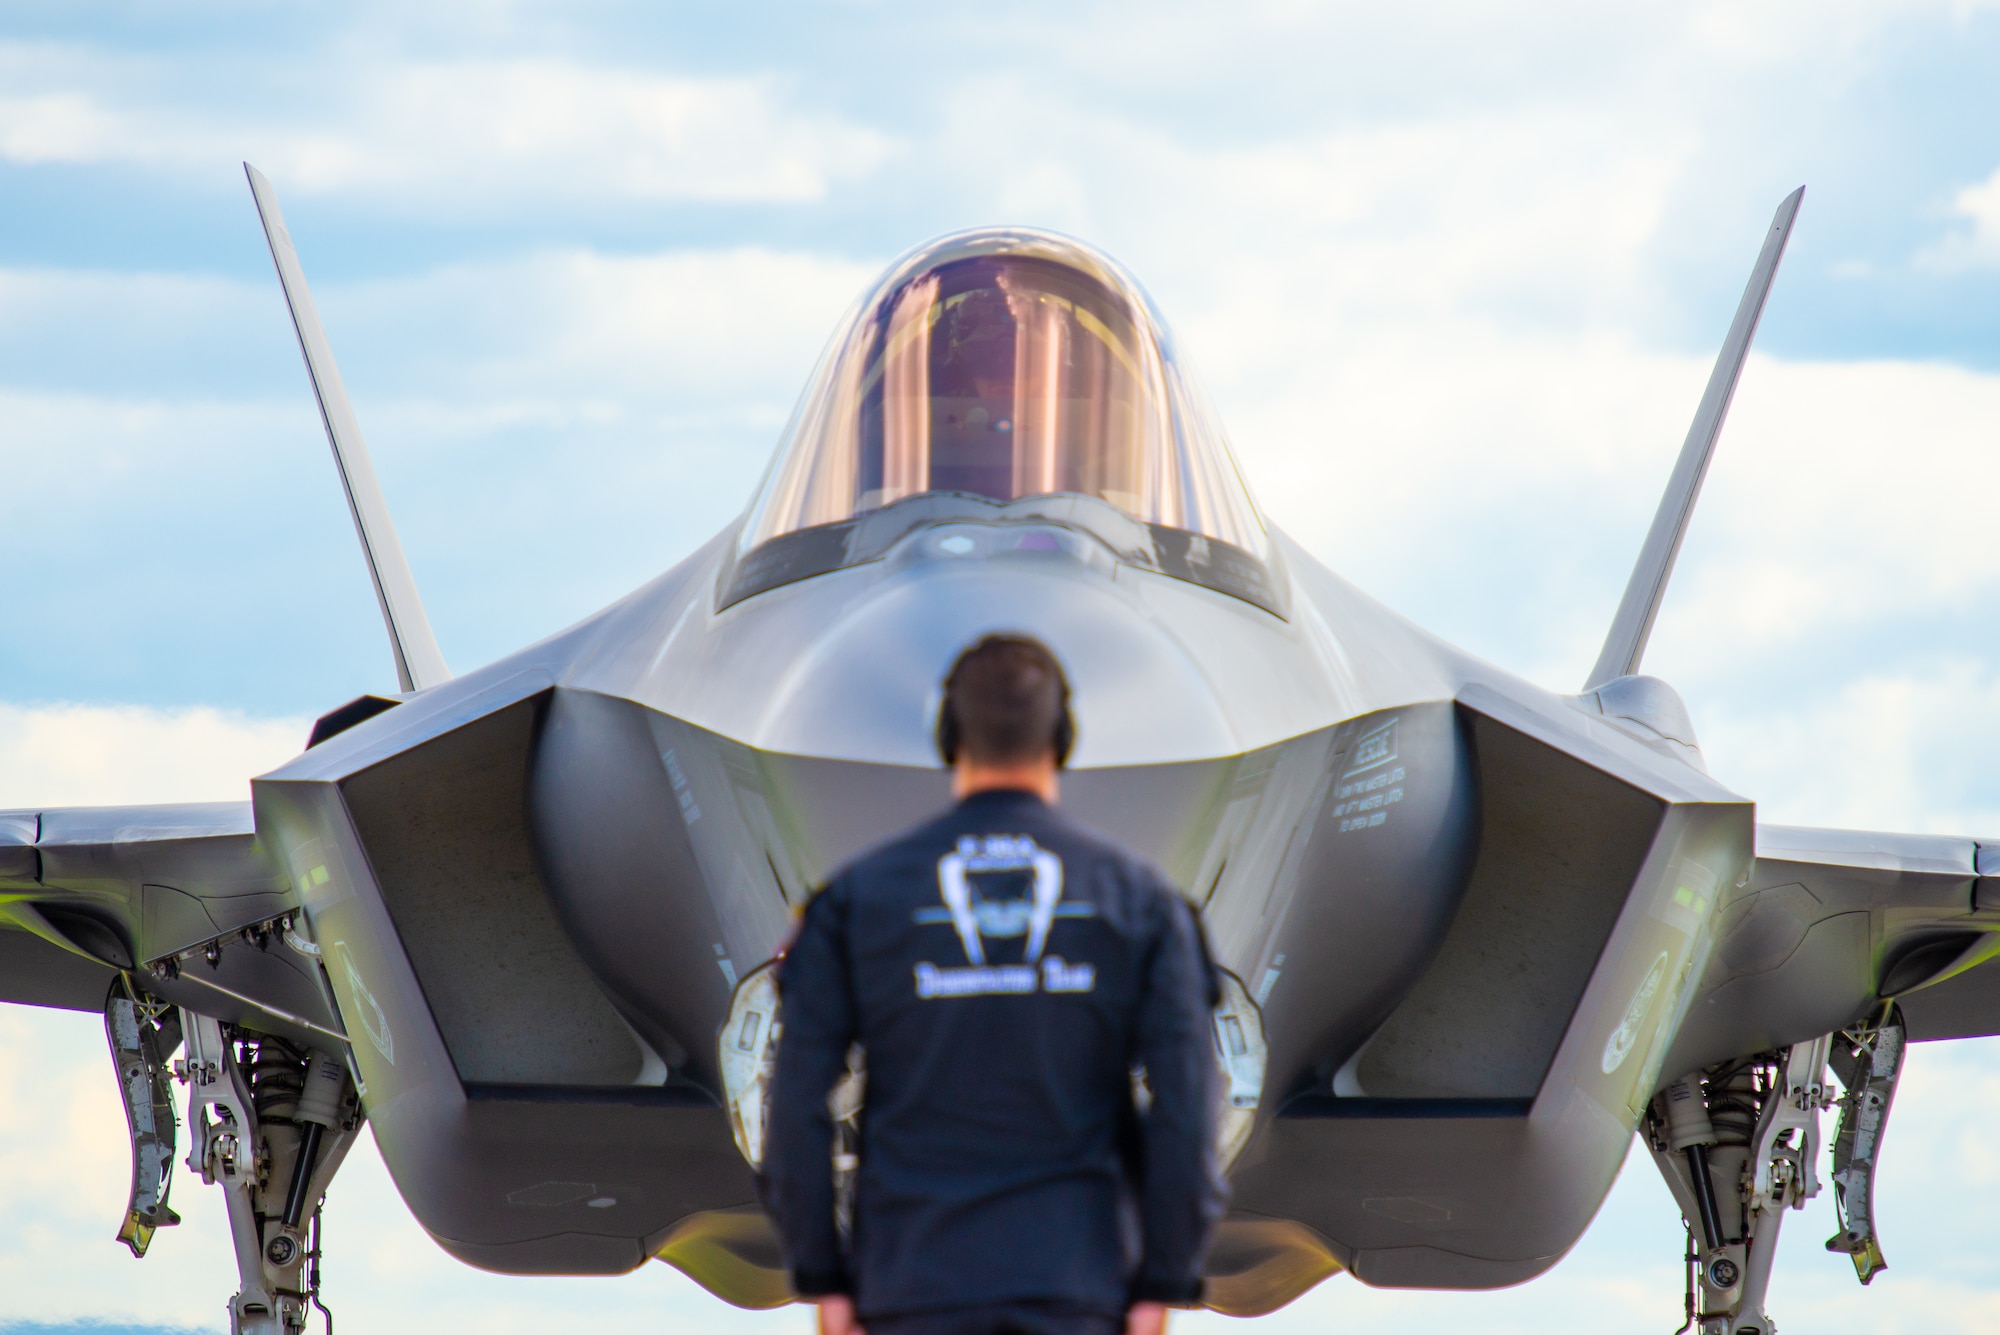 A Member of the F-35A Lightning II Demonstration Team prepares to launch Capt. Andrew “Dojo” Olson, F-35 pilot, during the Bagotville International Air Show in Quebec, Canada, June 22, 2019. The team performed during both days of the air show. (U.S. Air Force photo by Staff Sgt. Jensen Stidham)